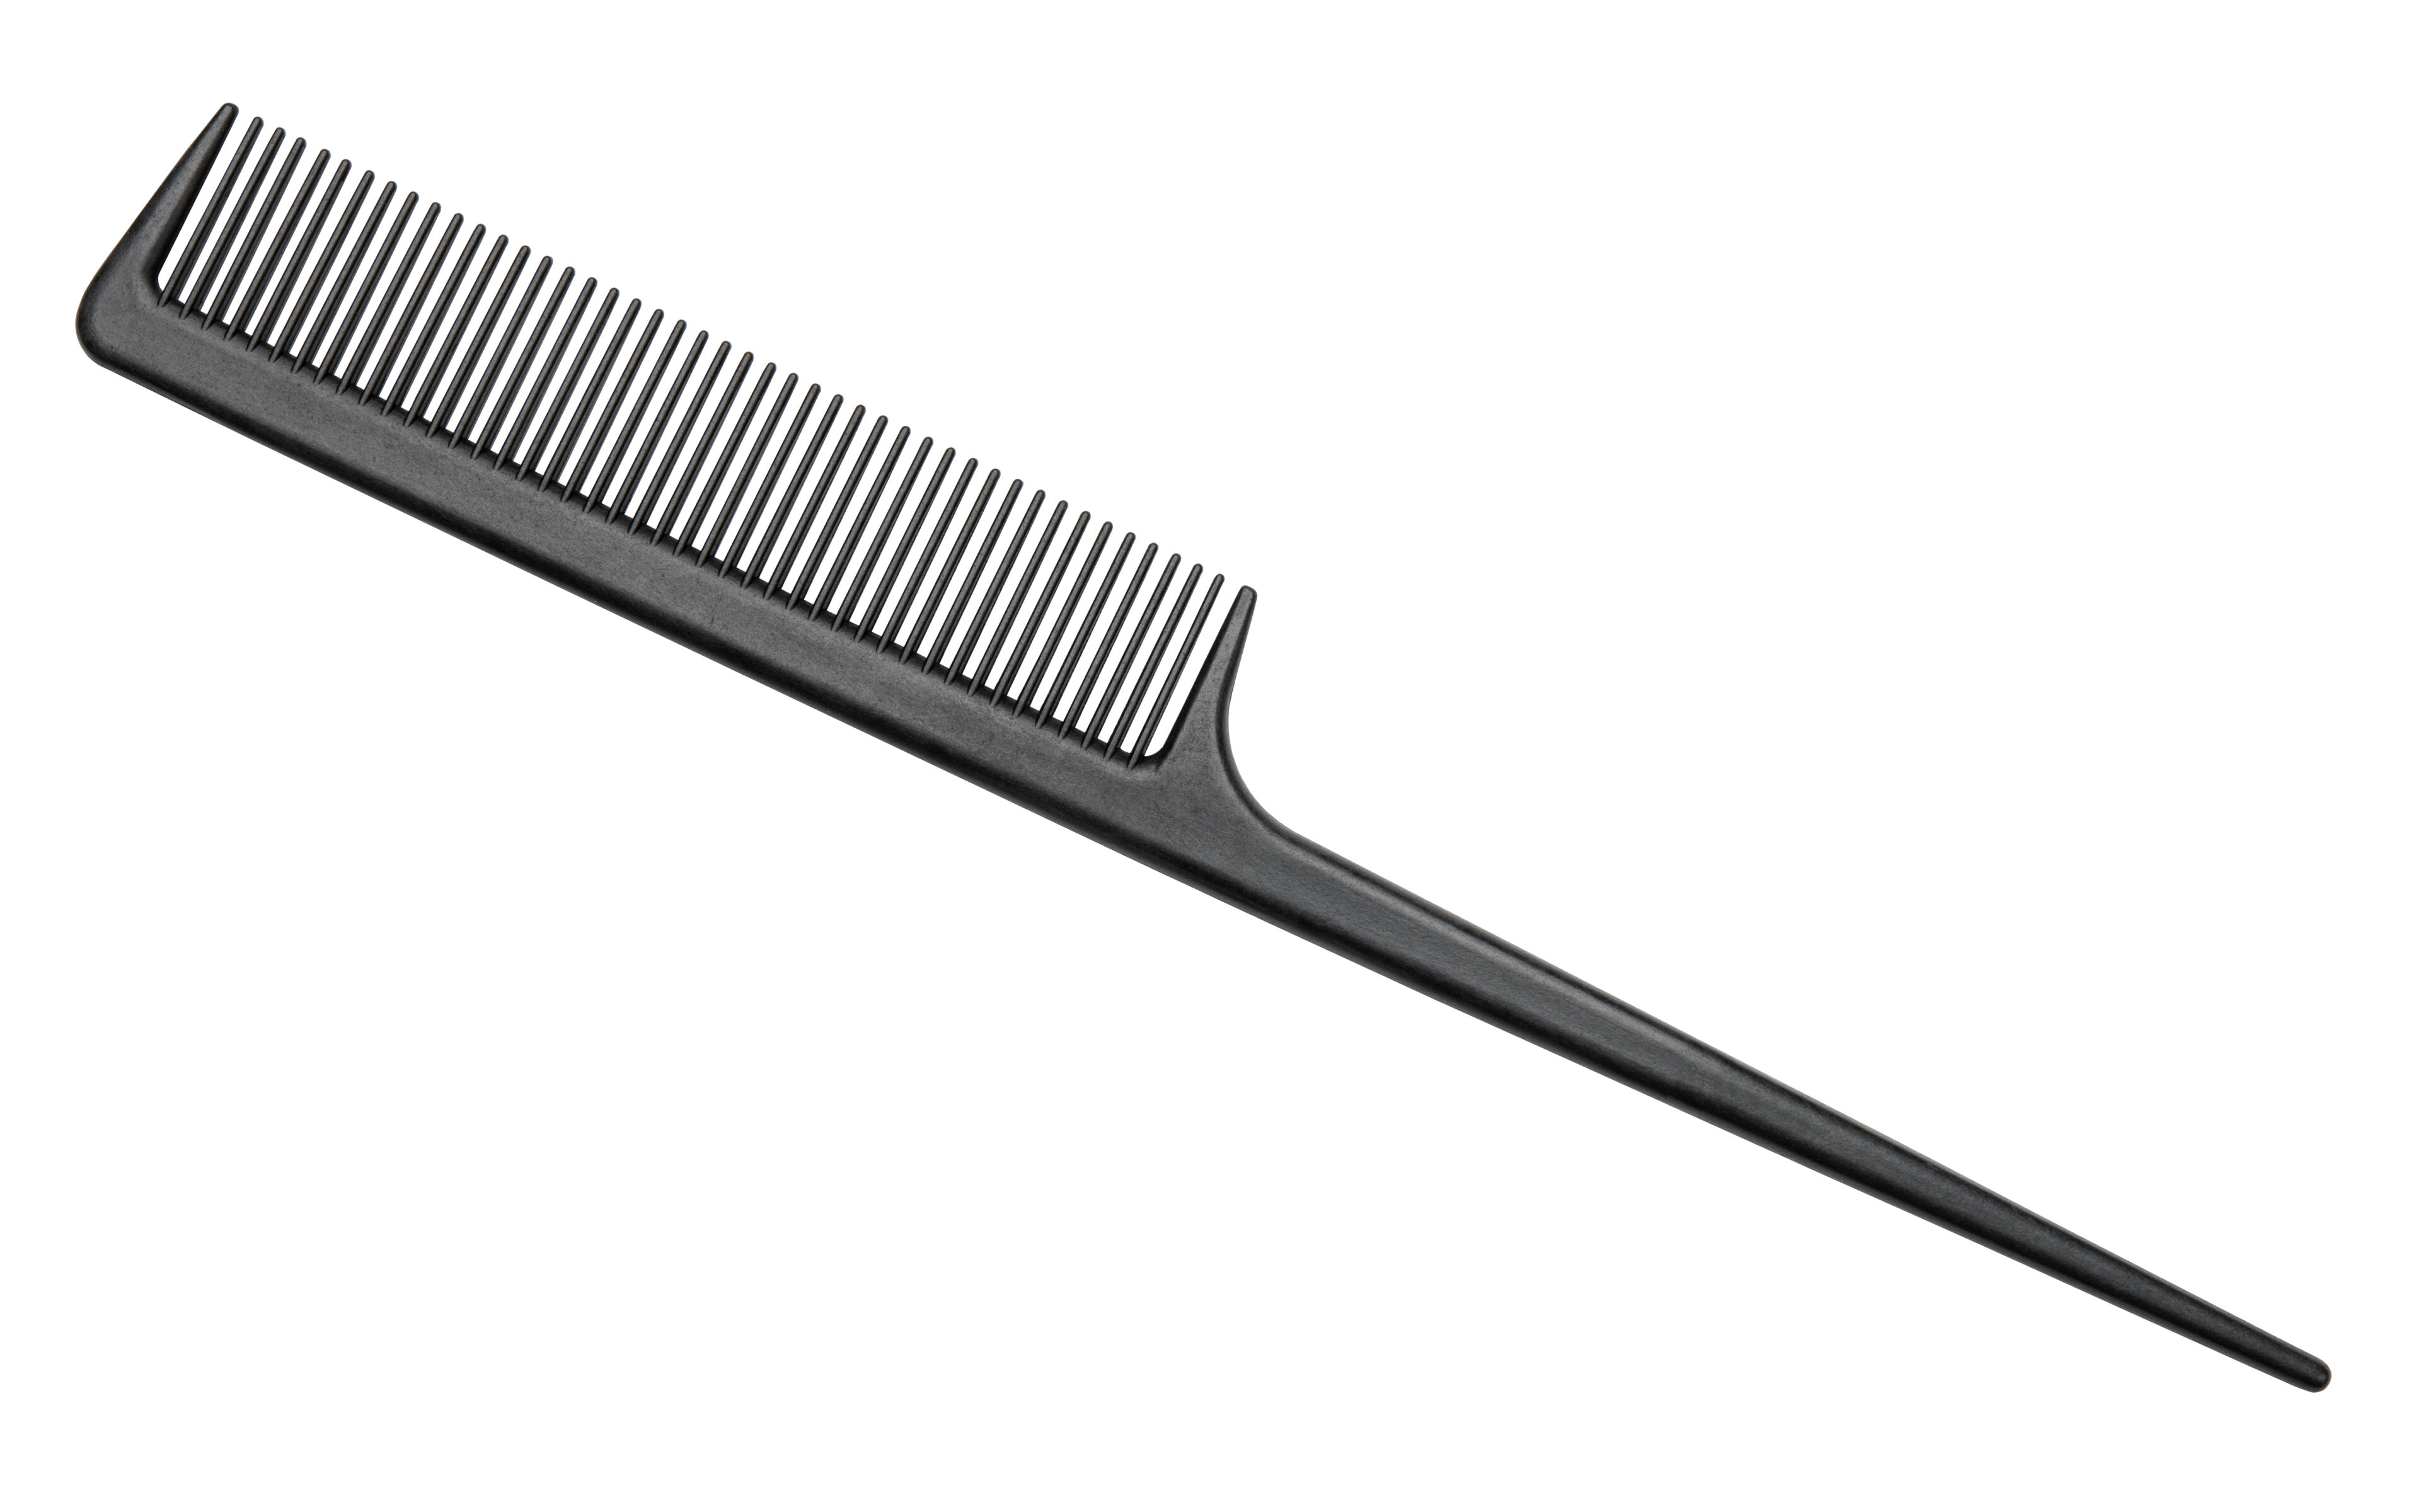 A fine-toothed comb